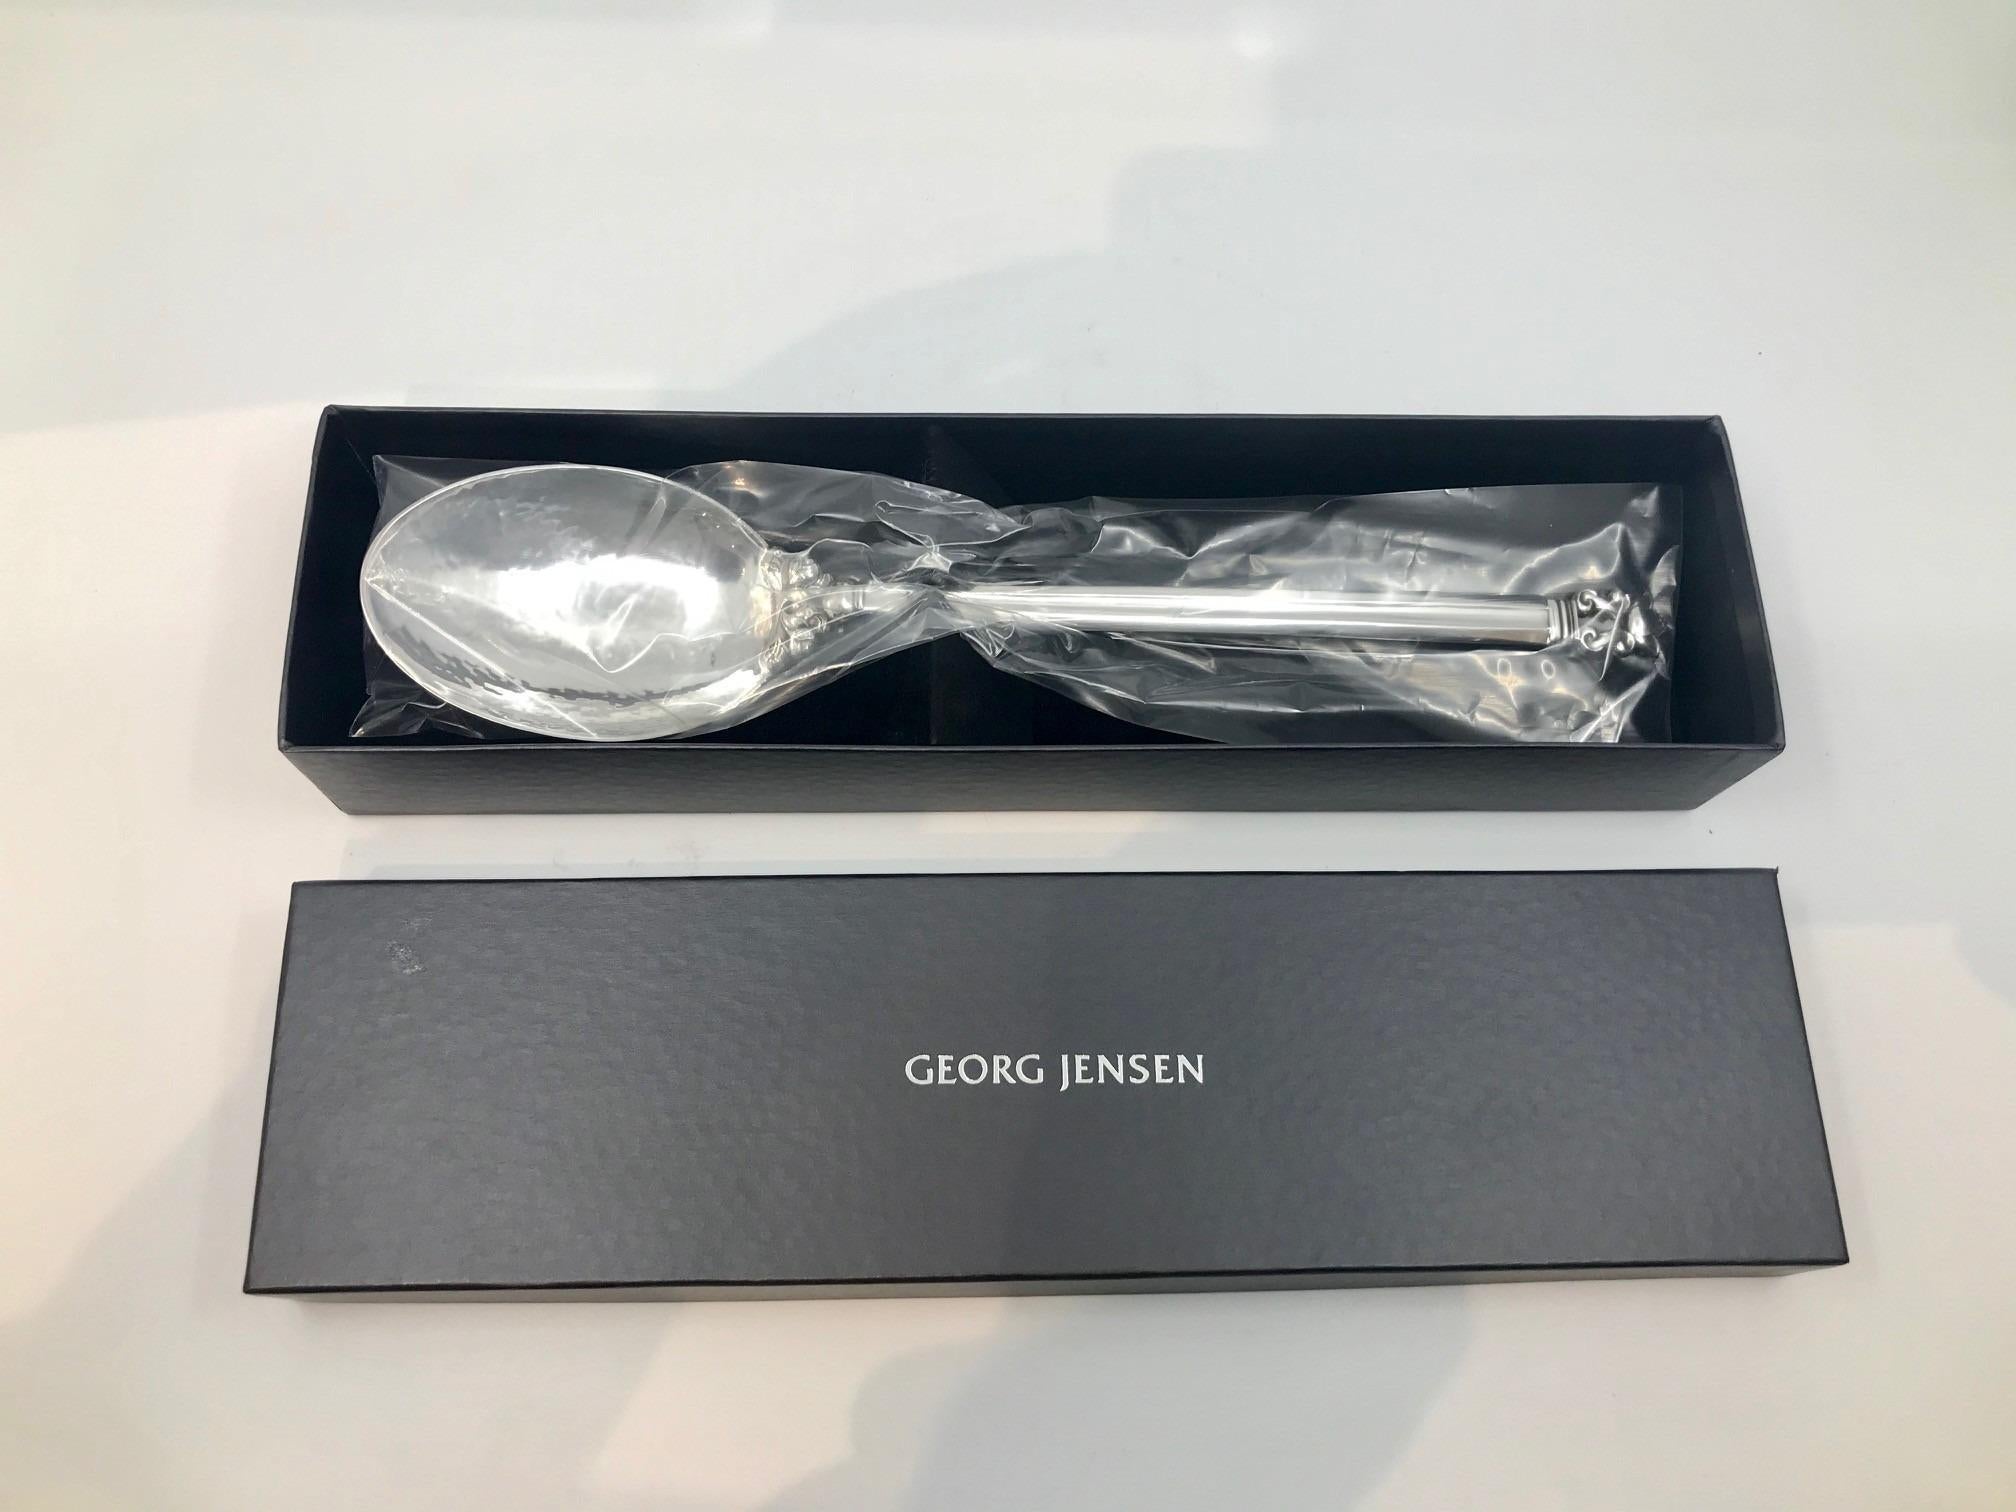 Georg Jensen sterling silver stuffing spoon in the Acorn Pattern, flatware design #62 by Johan Rohde from 1915. Comes in original Georg Jensen fitted box.

Additional information:
Item number:306233
Material: Sterling silver  & stainless